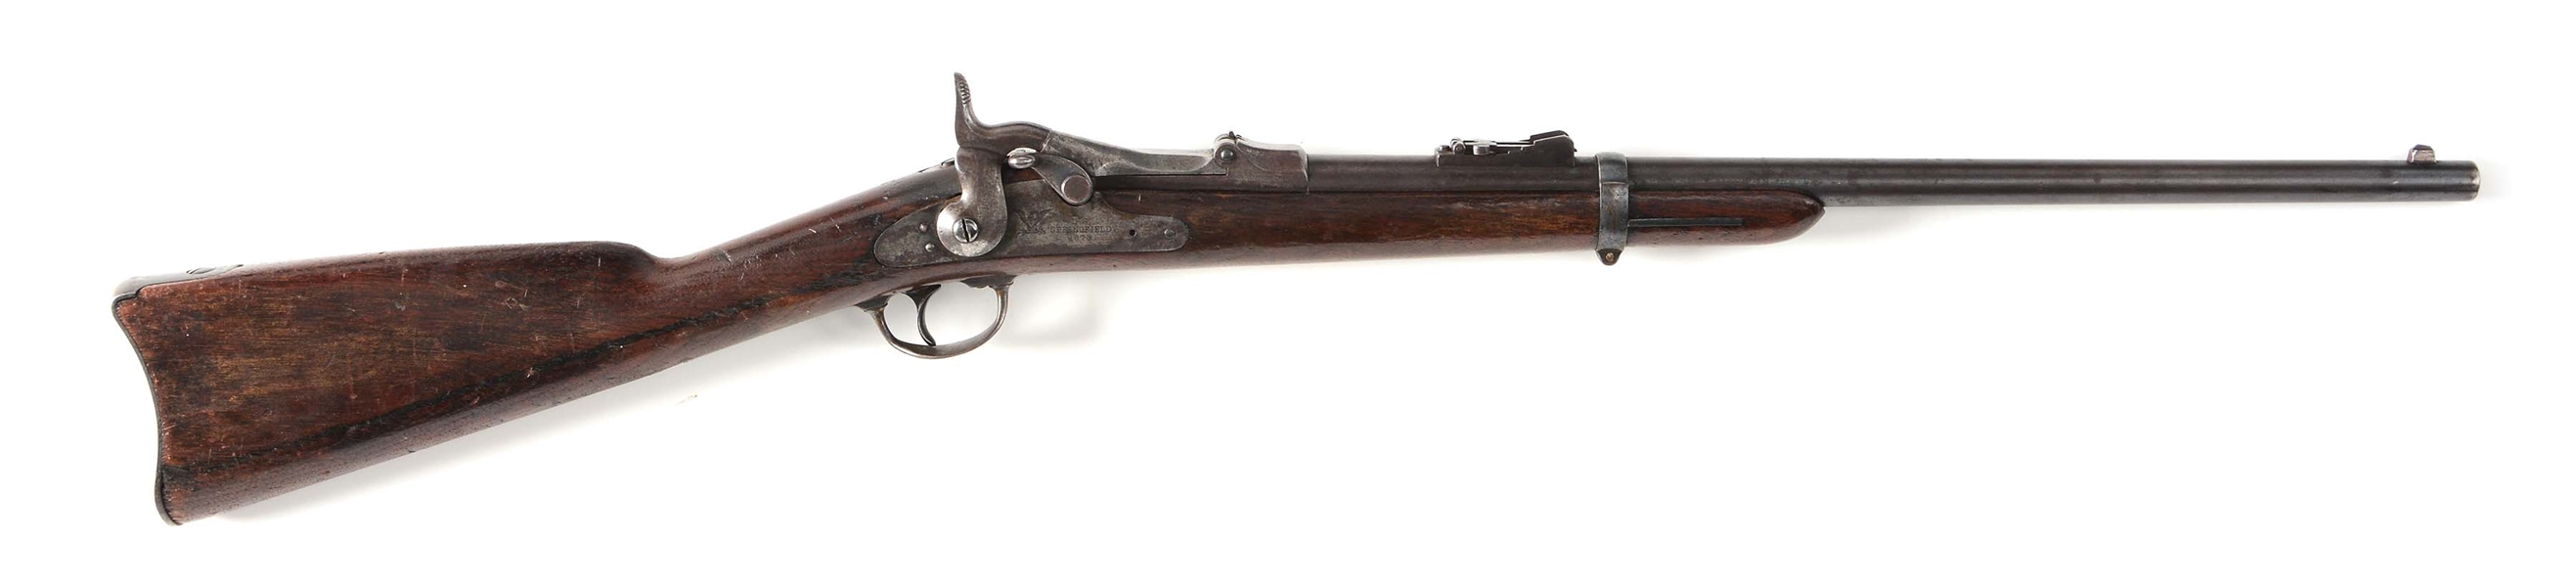 (A) FINE EARLY CUSTER 7TH CAVALRY RANGE US MODEL 1873 SPRINGFIELD TRAPDOOR CARBINE.